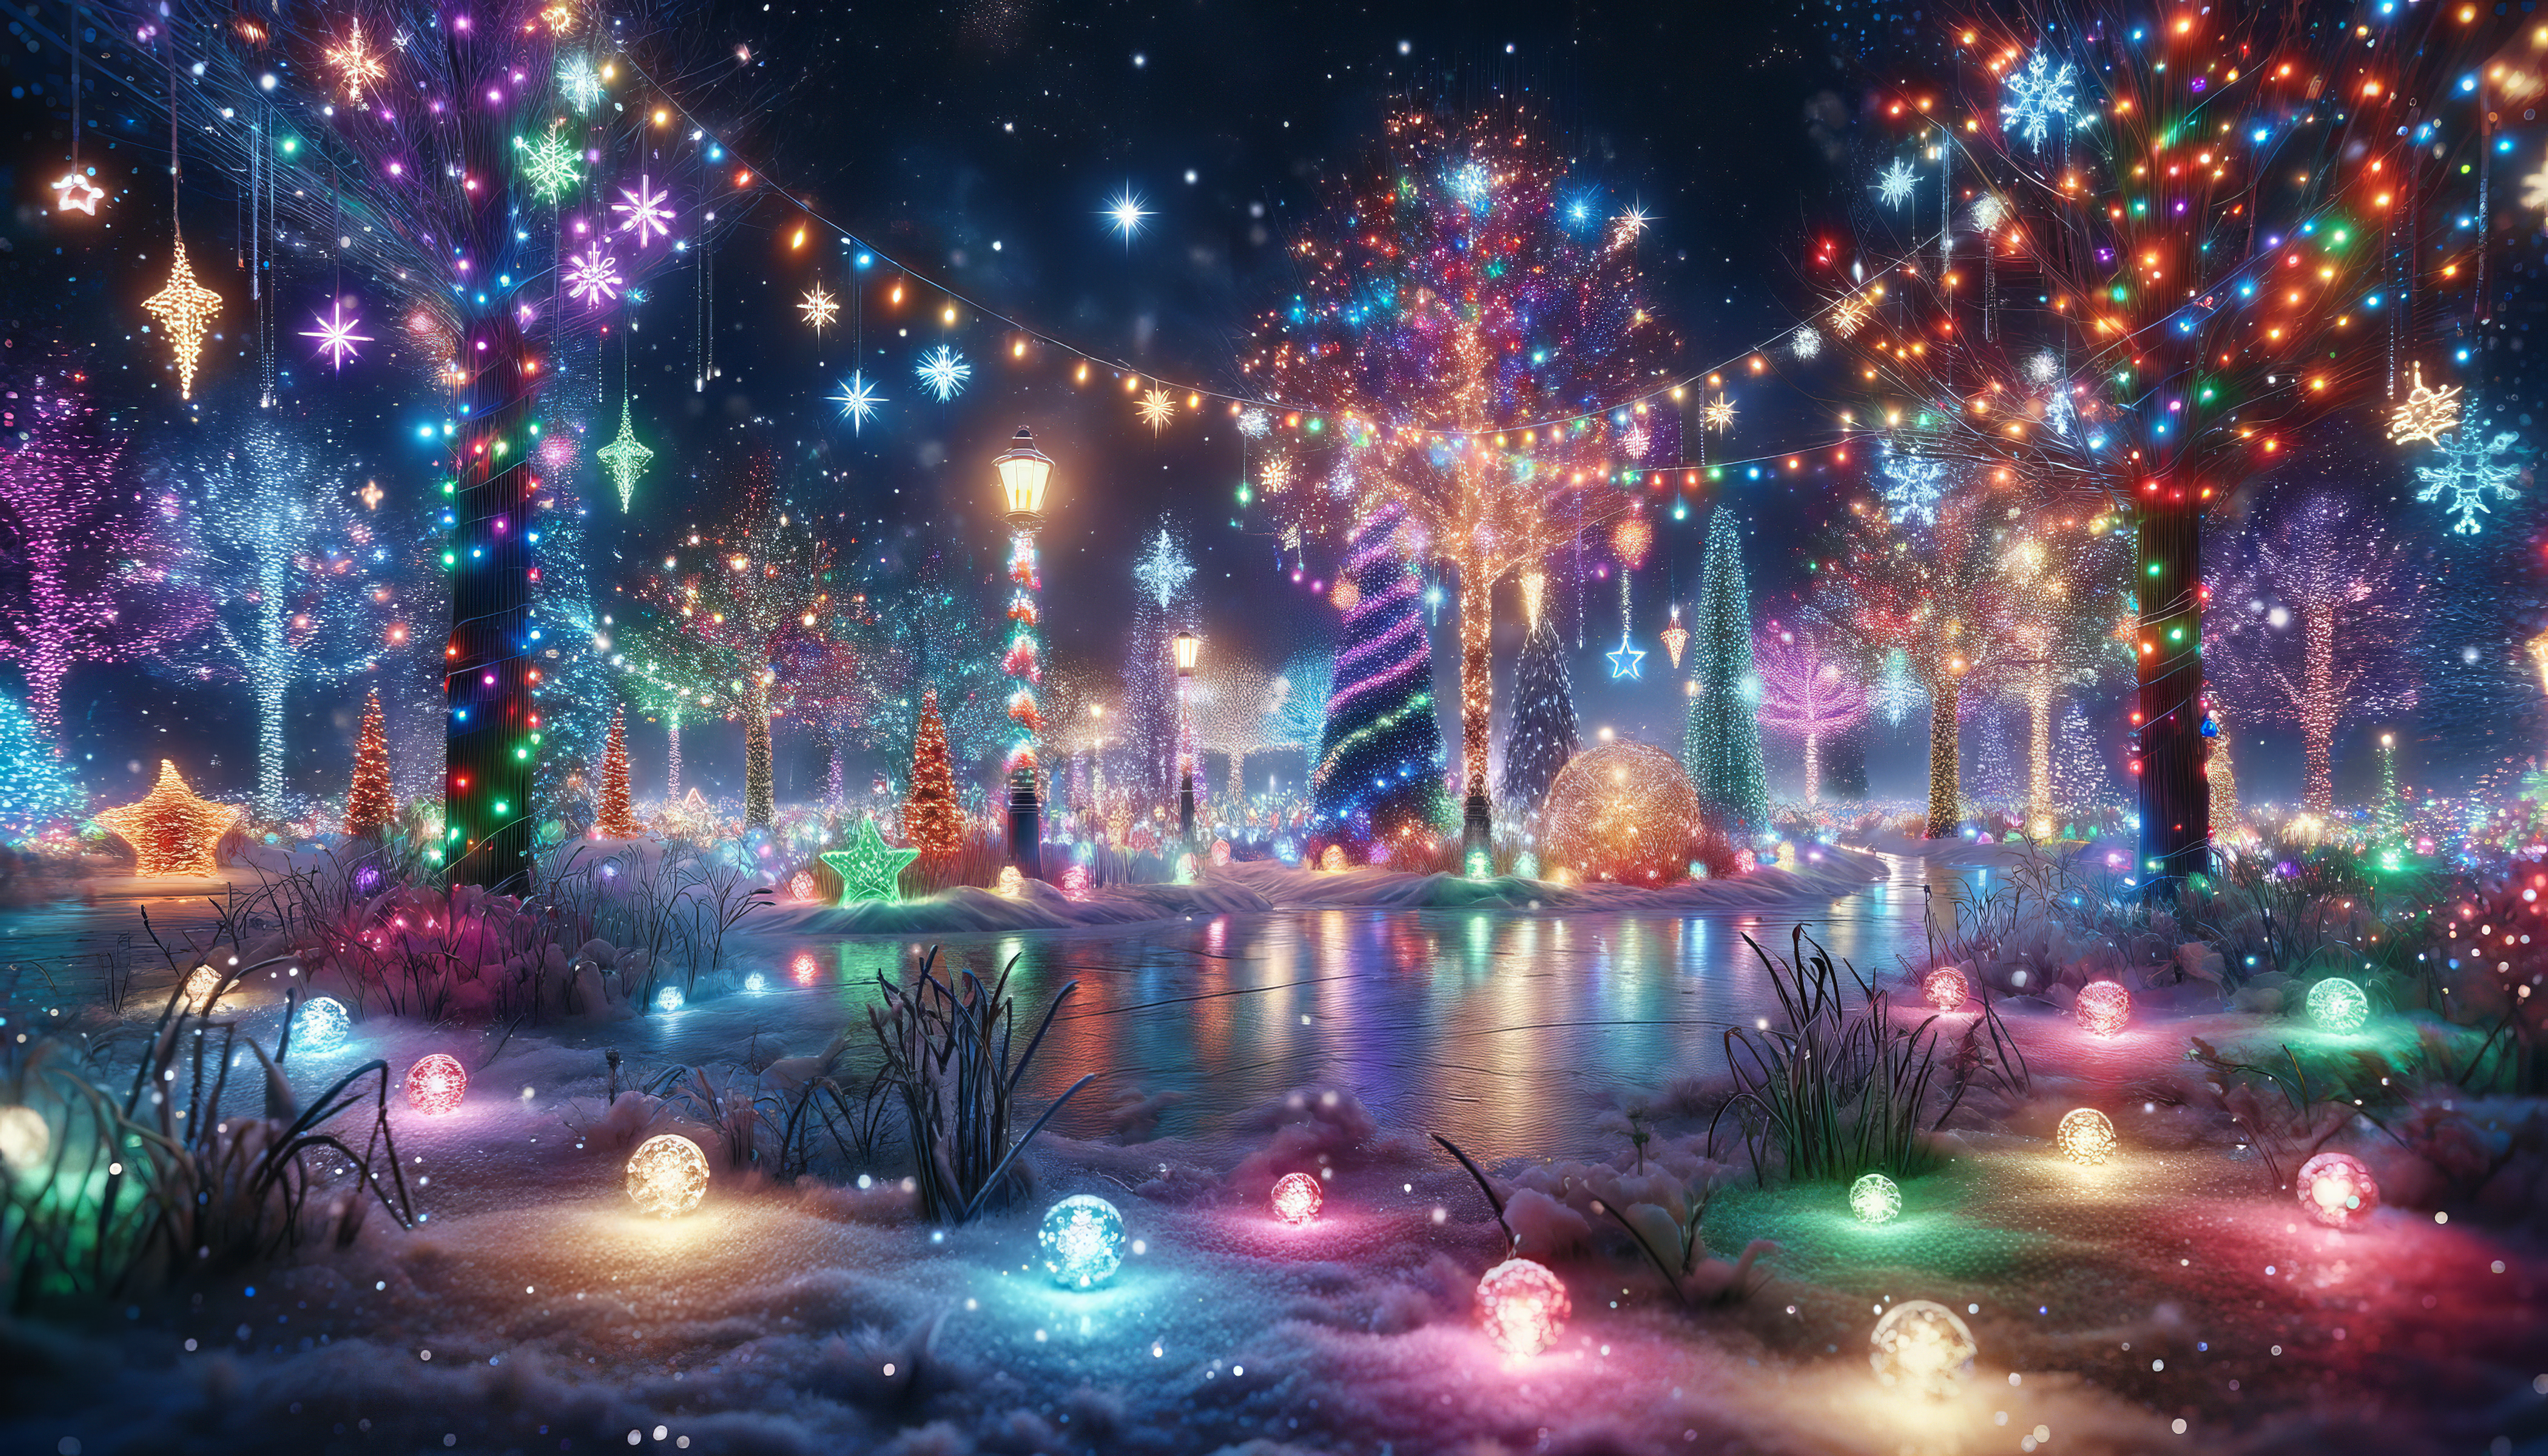 Enchanting HD Christmas lights desktop wallpaper showcasing a magical winter scene with sparkling trees, colorful illuminations, and a festive atmosphere.